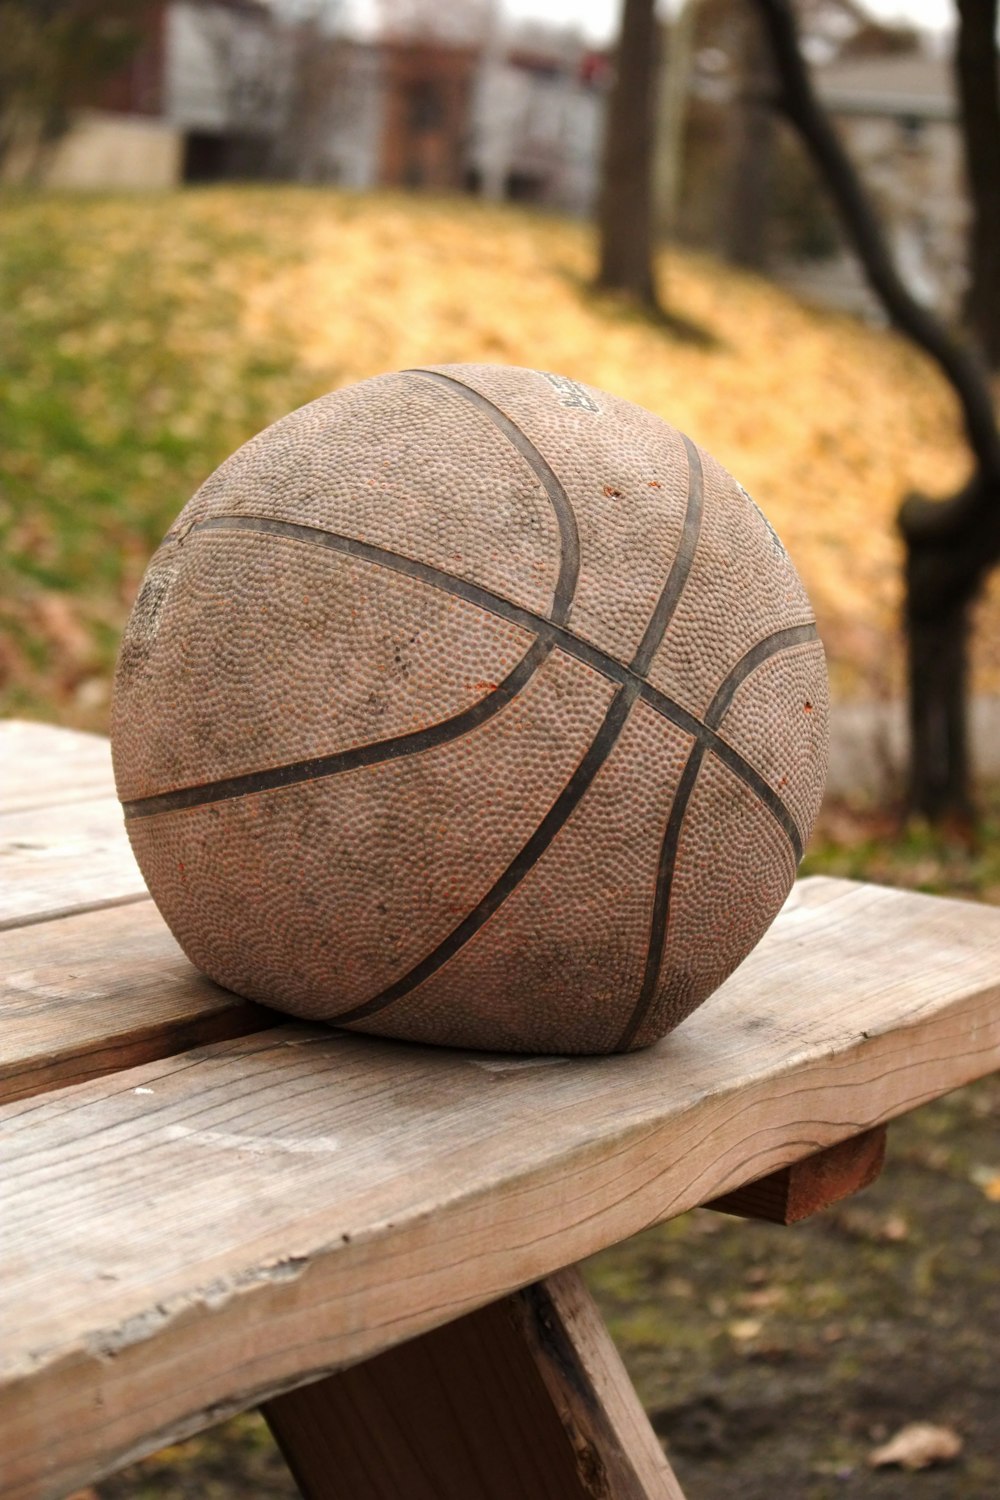 a basketball sitting on top of a wooden bench